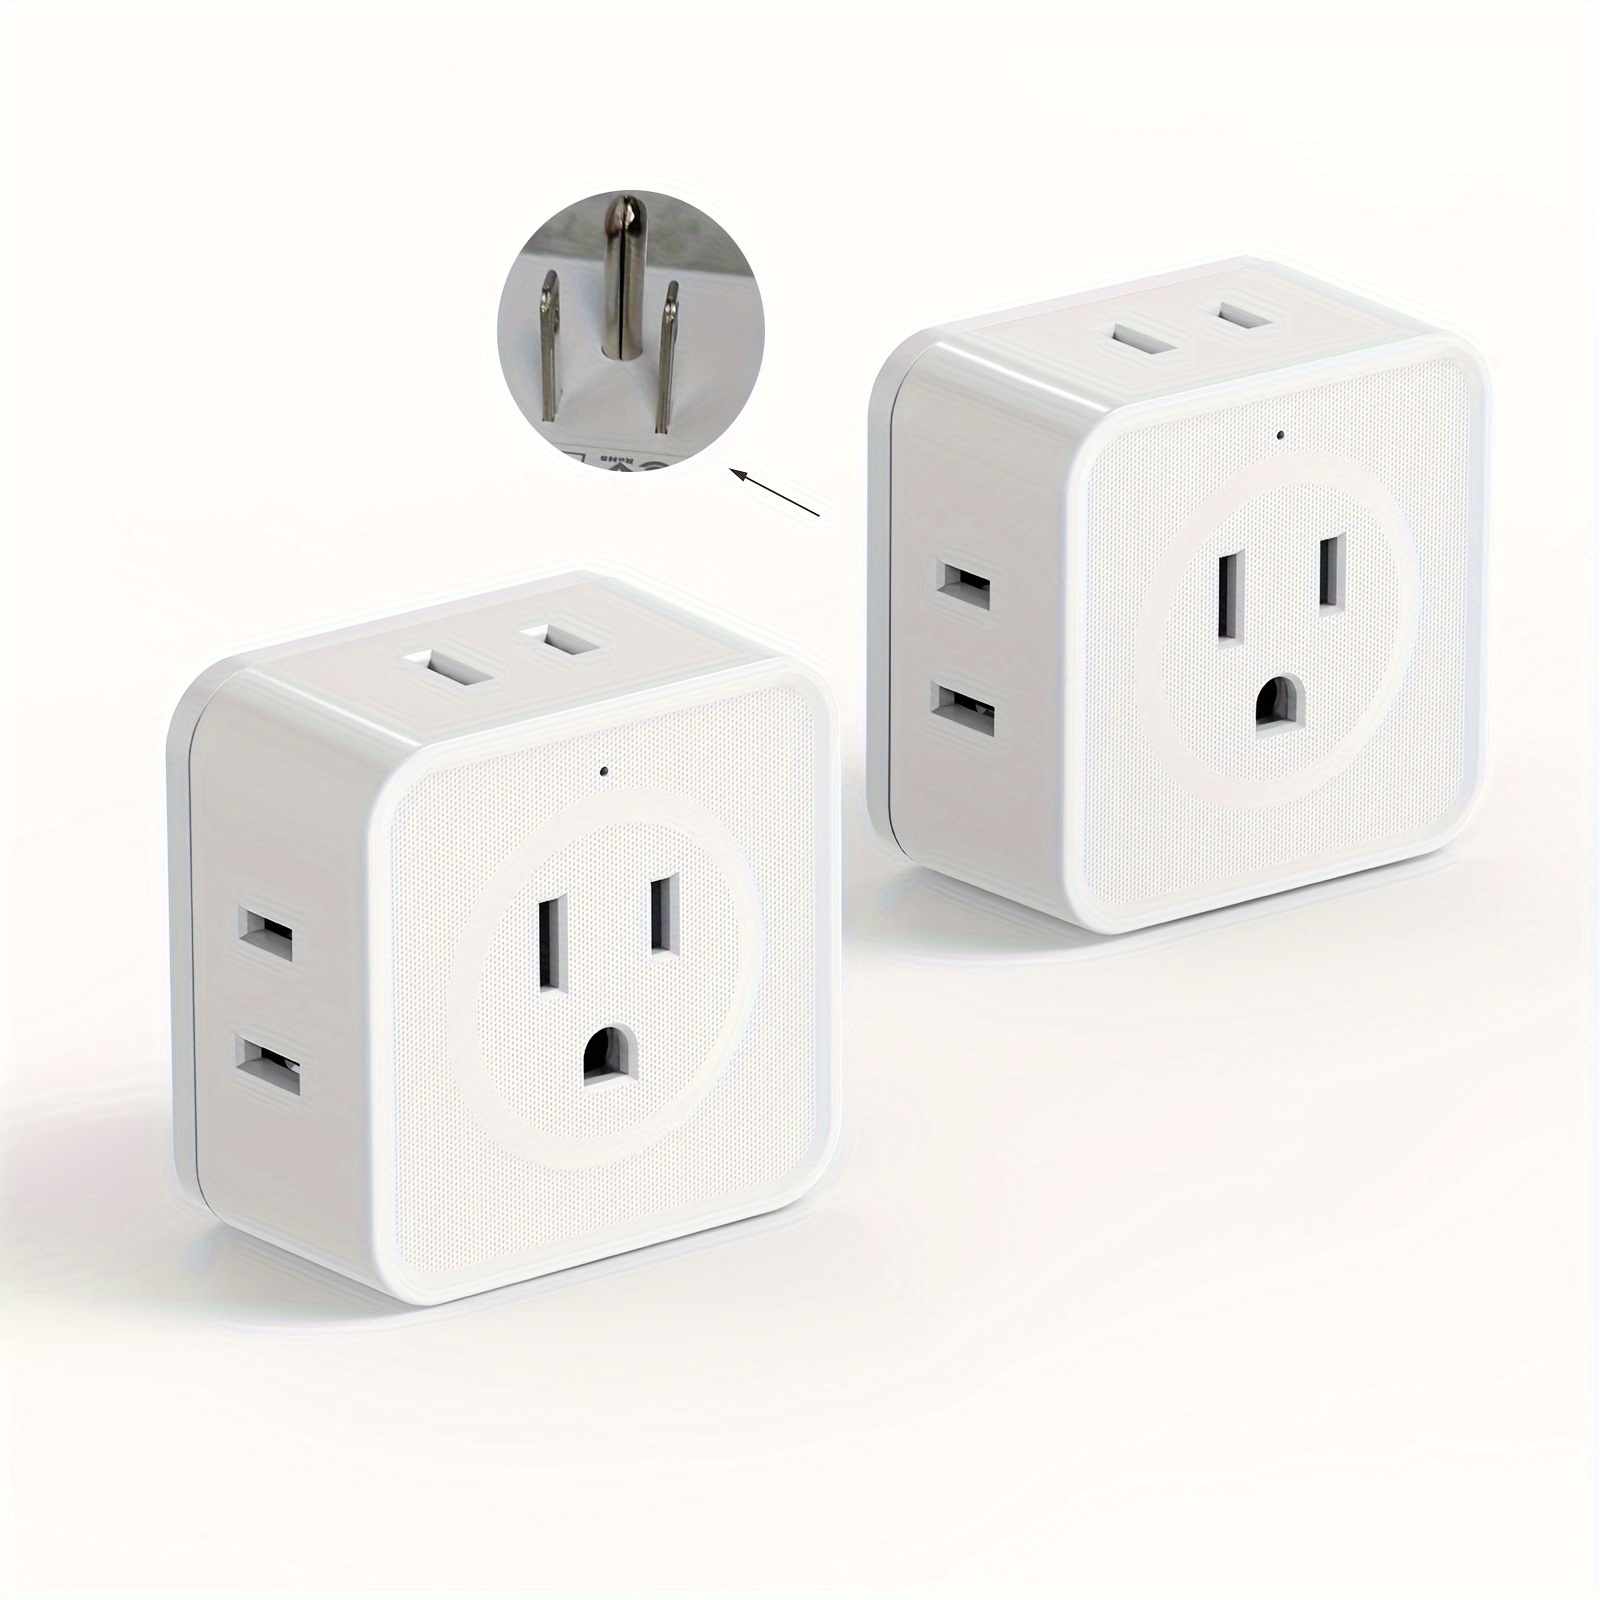 

Multi Plug Outlet Extender, 2 Packs Multiple Outlet Splitter Box, 5 Way Wall Outlet Expander, Wall Tap Power Expander Adapter For Cruise Ship Home Office Dorm Room Essentials